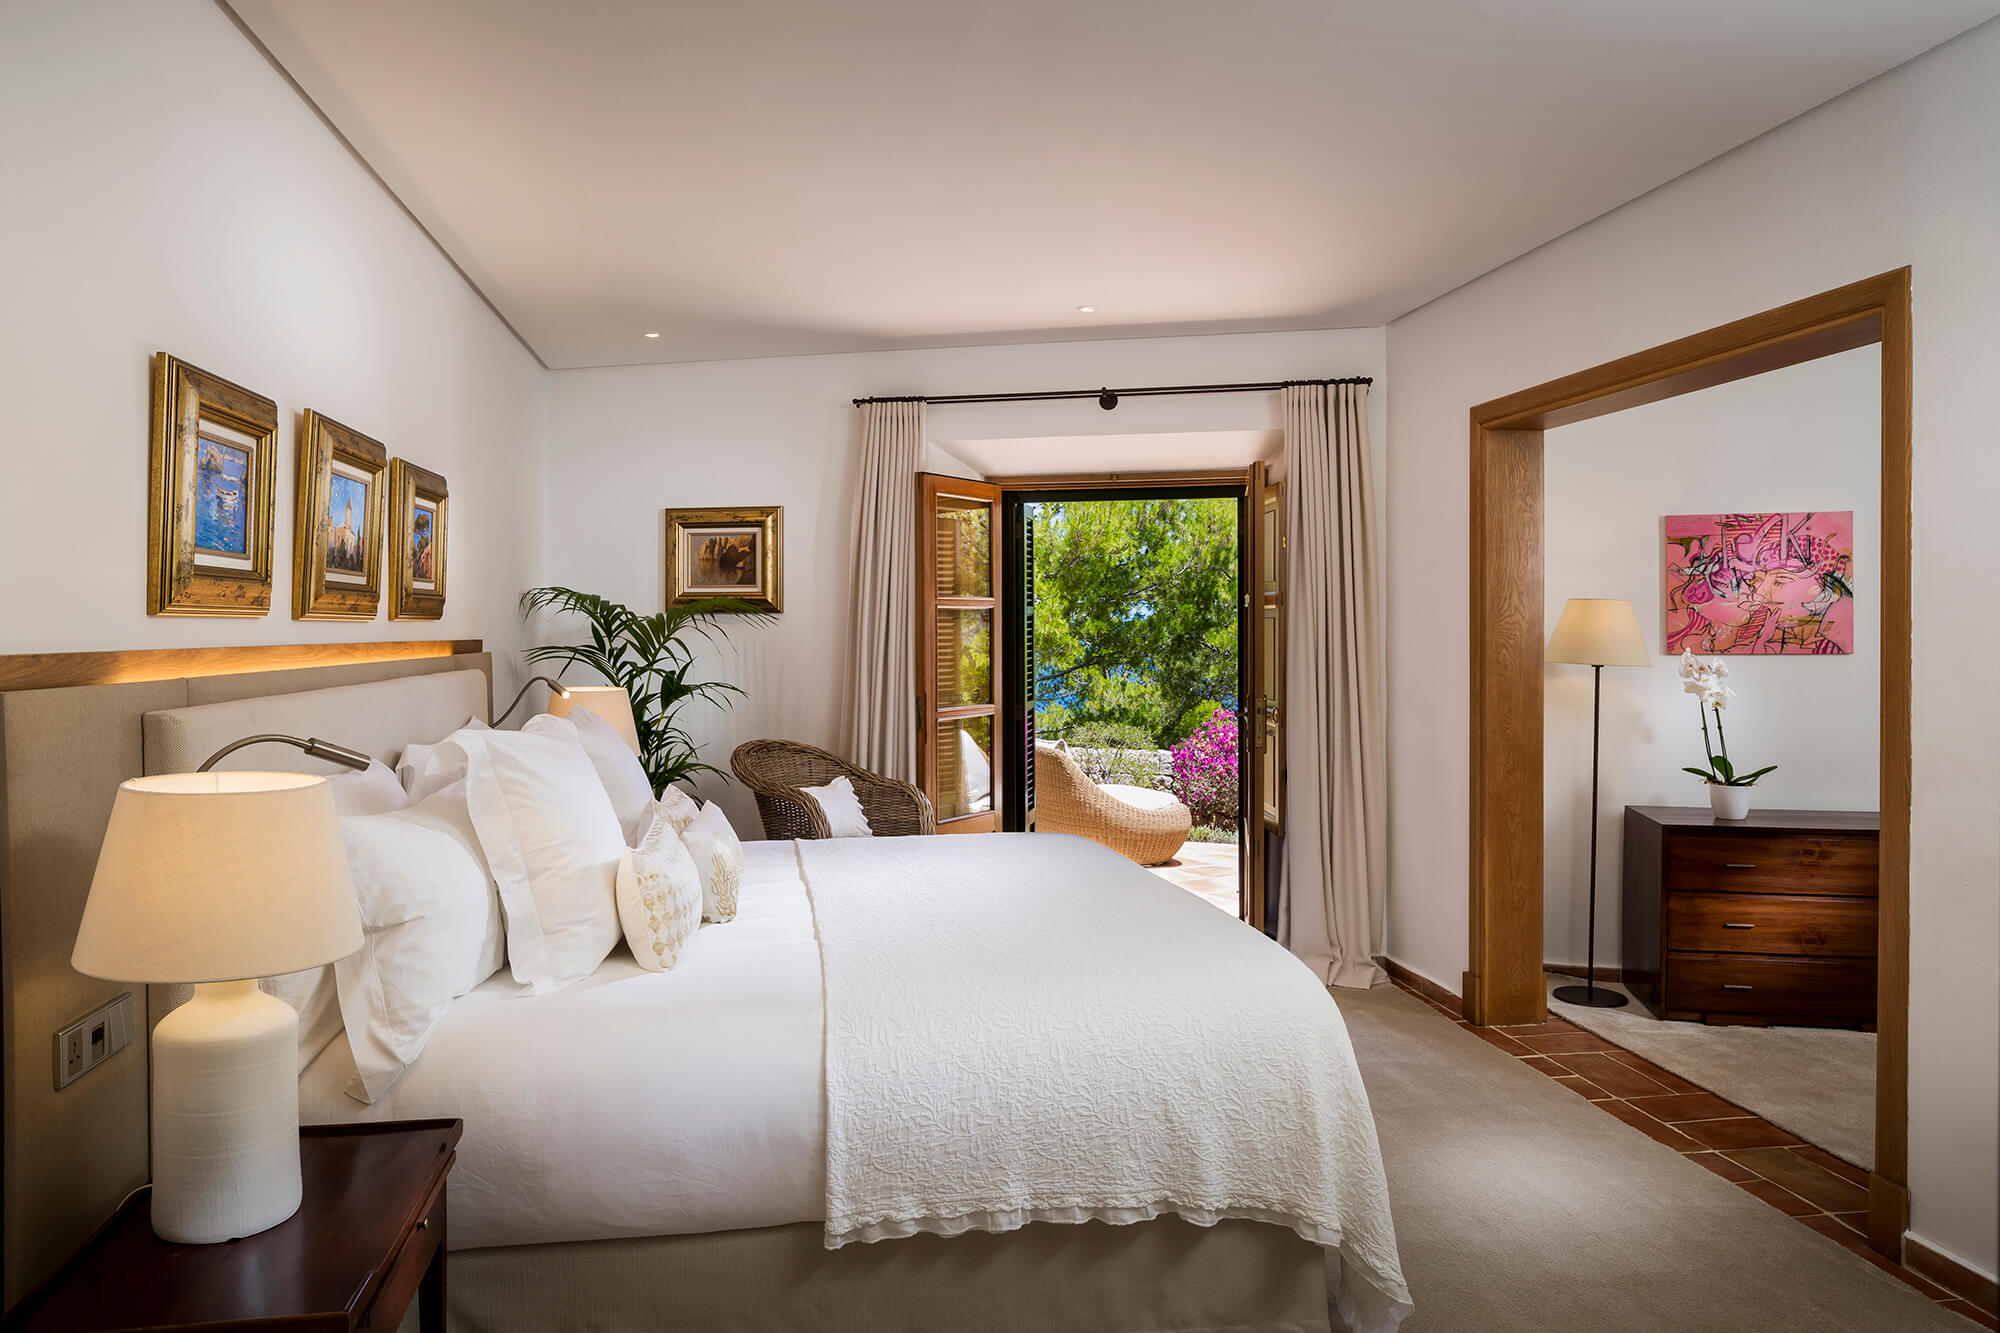 All rooms are combining modern comforts with a traditional ambiance